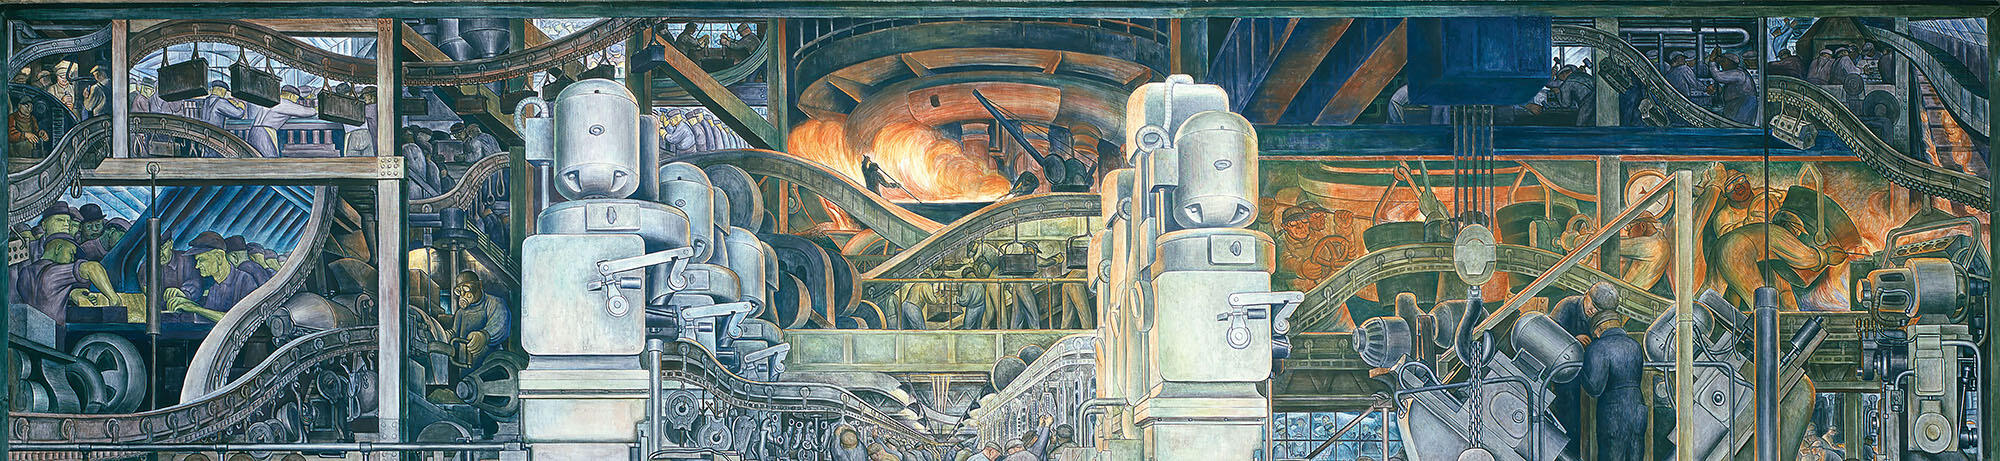 Detail from “Detroit Industry,” north wall, showing the blast furnace and overhead transportation systems. (Image courtesy of the Detroit Institute of Arts.) 